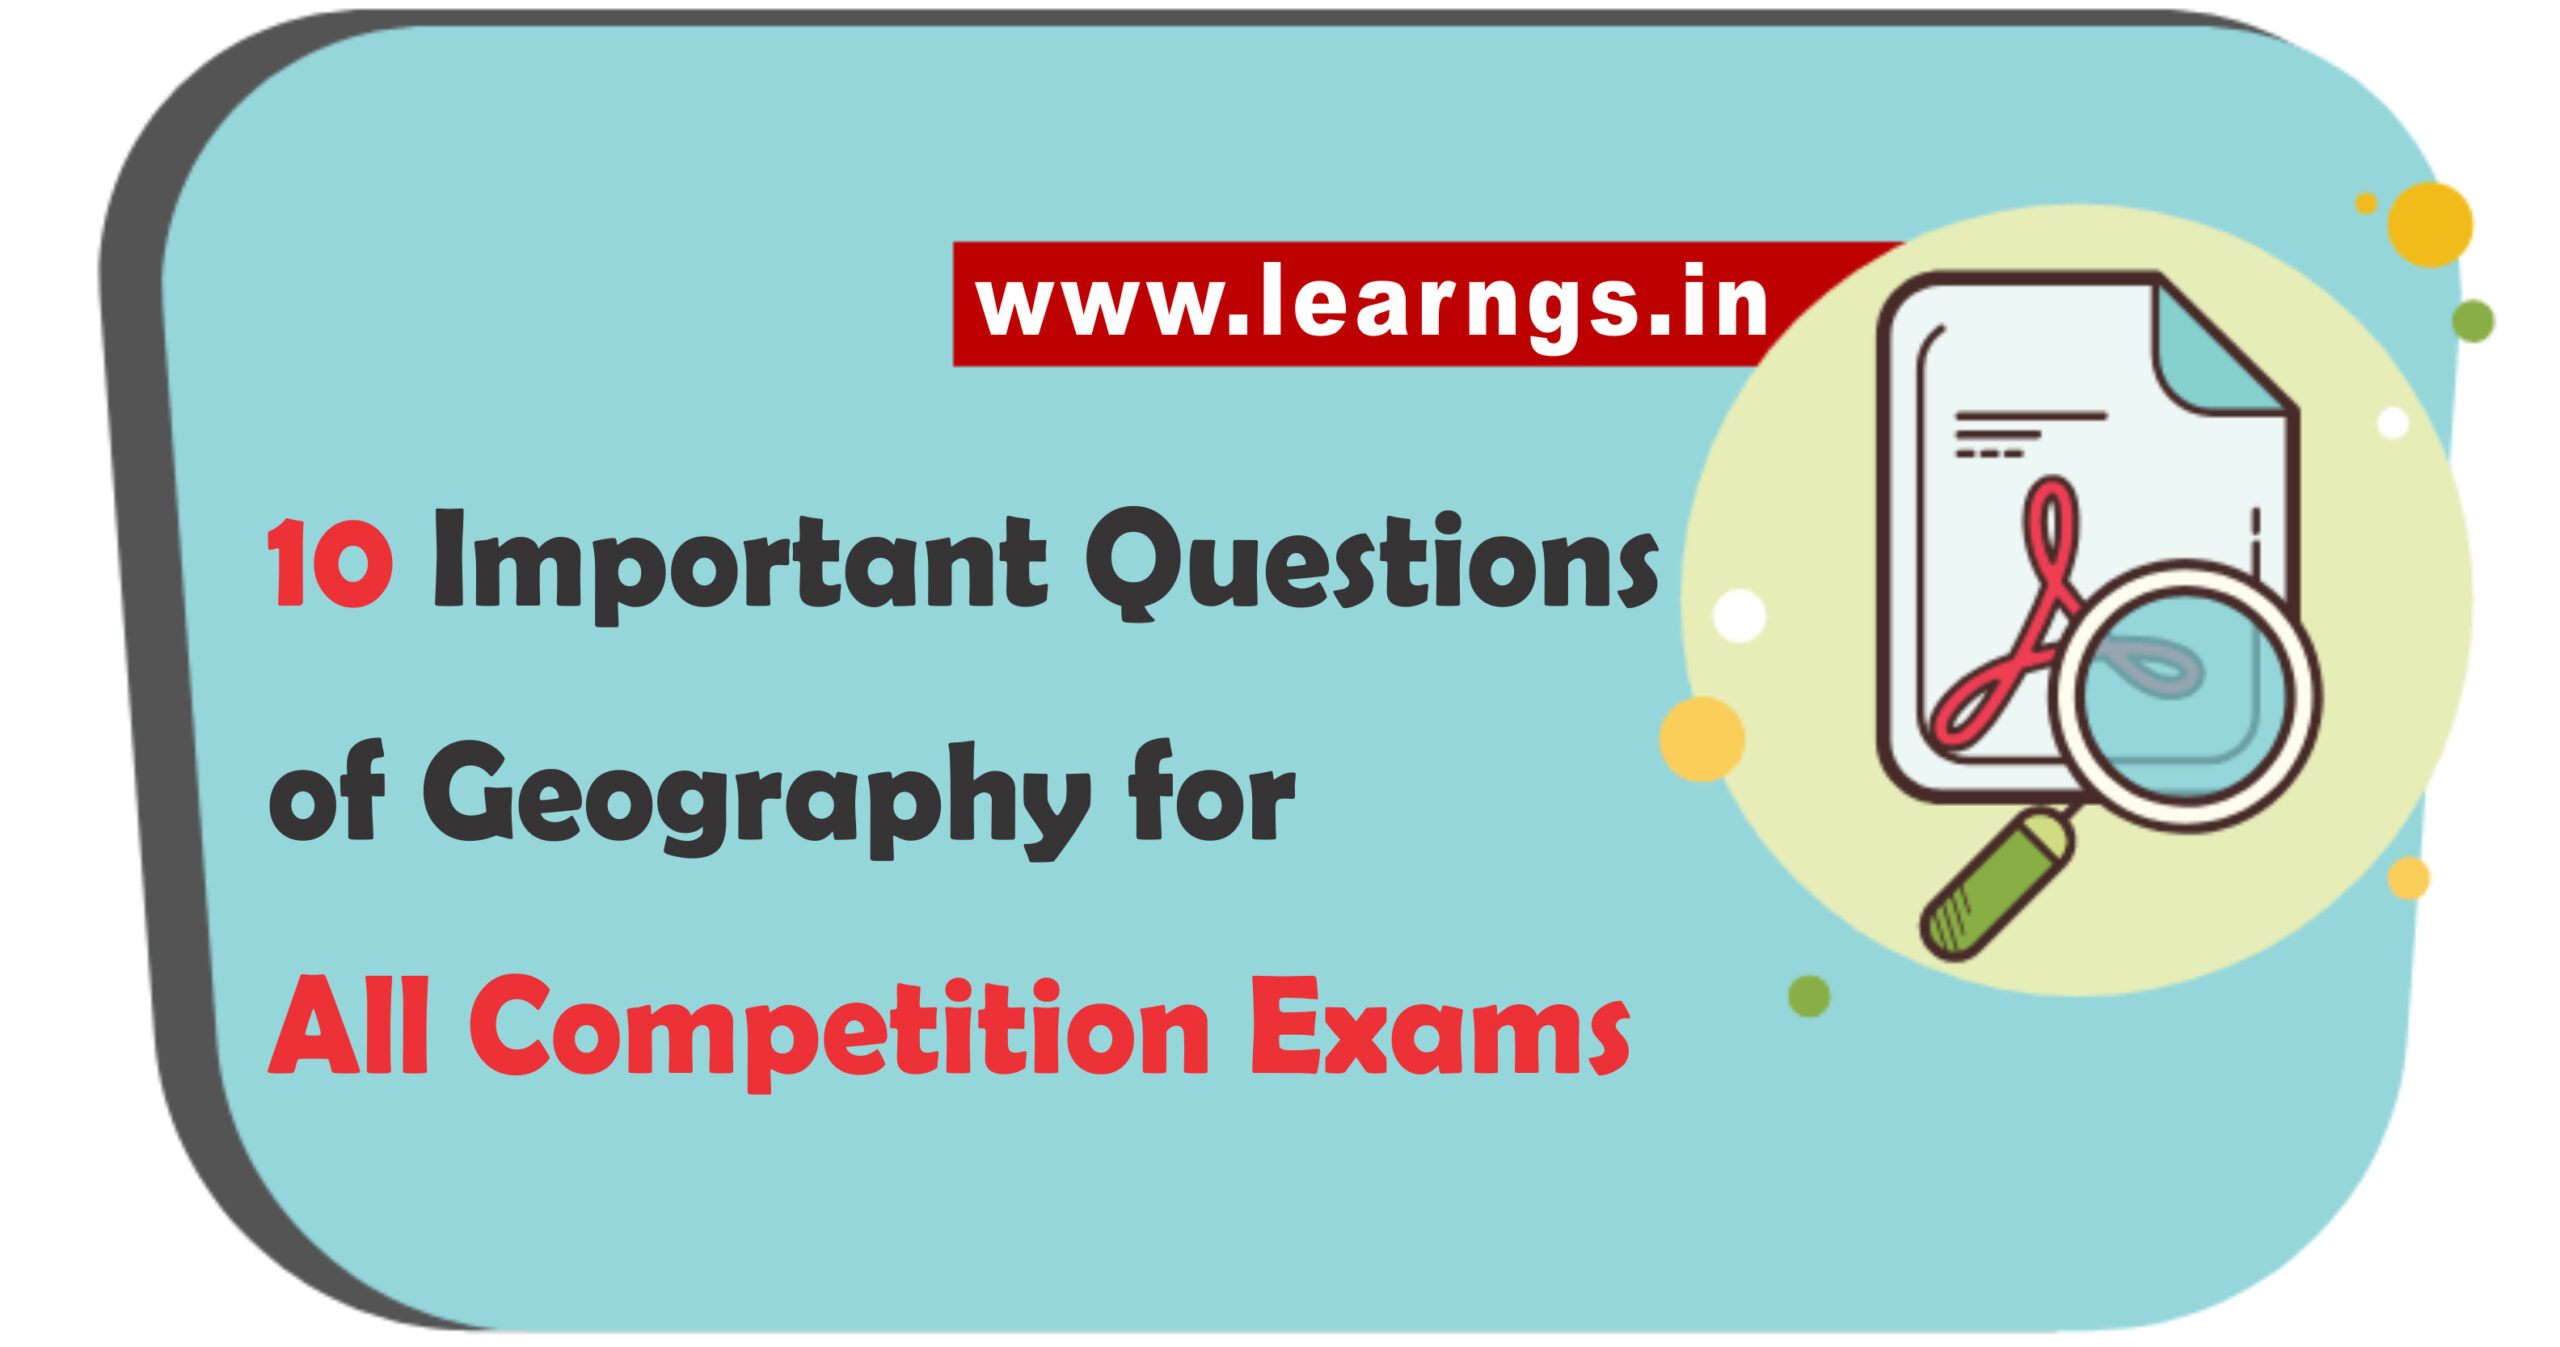 10 Important Questions of Geography for All Competition Exams